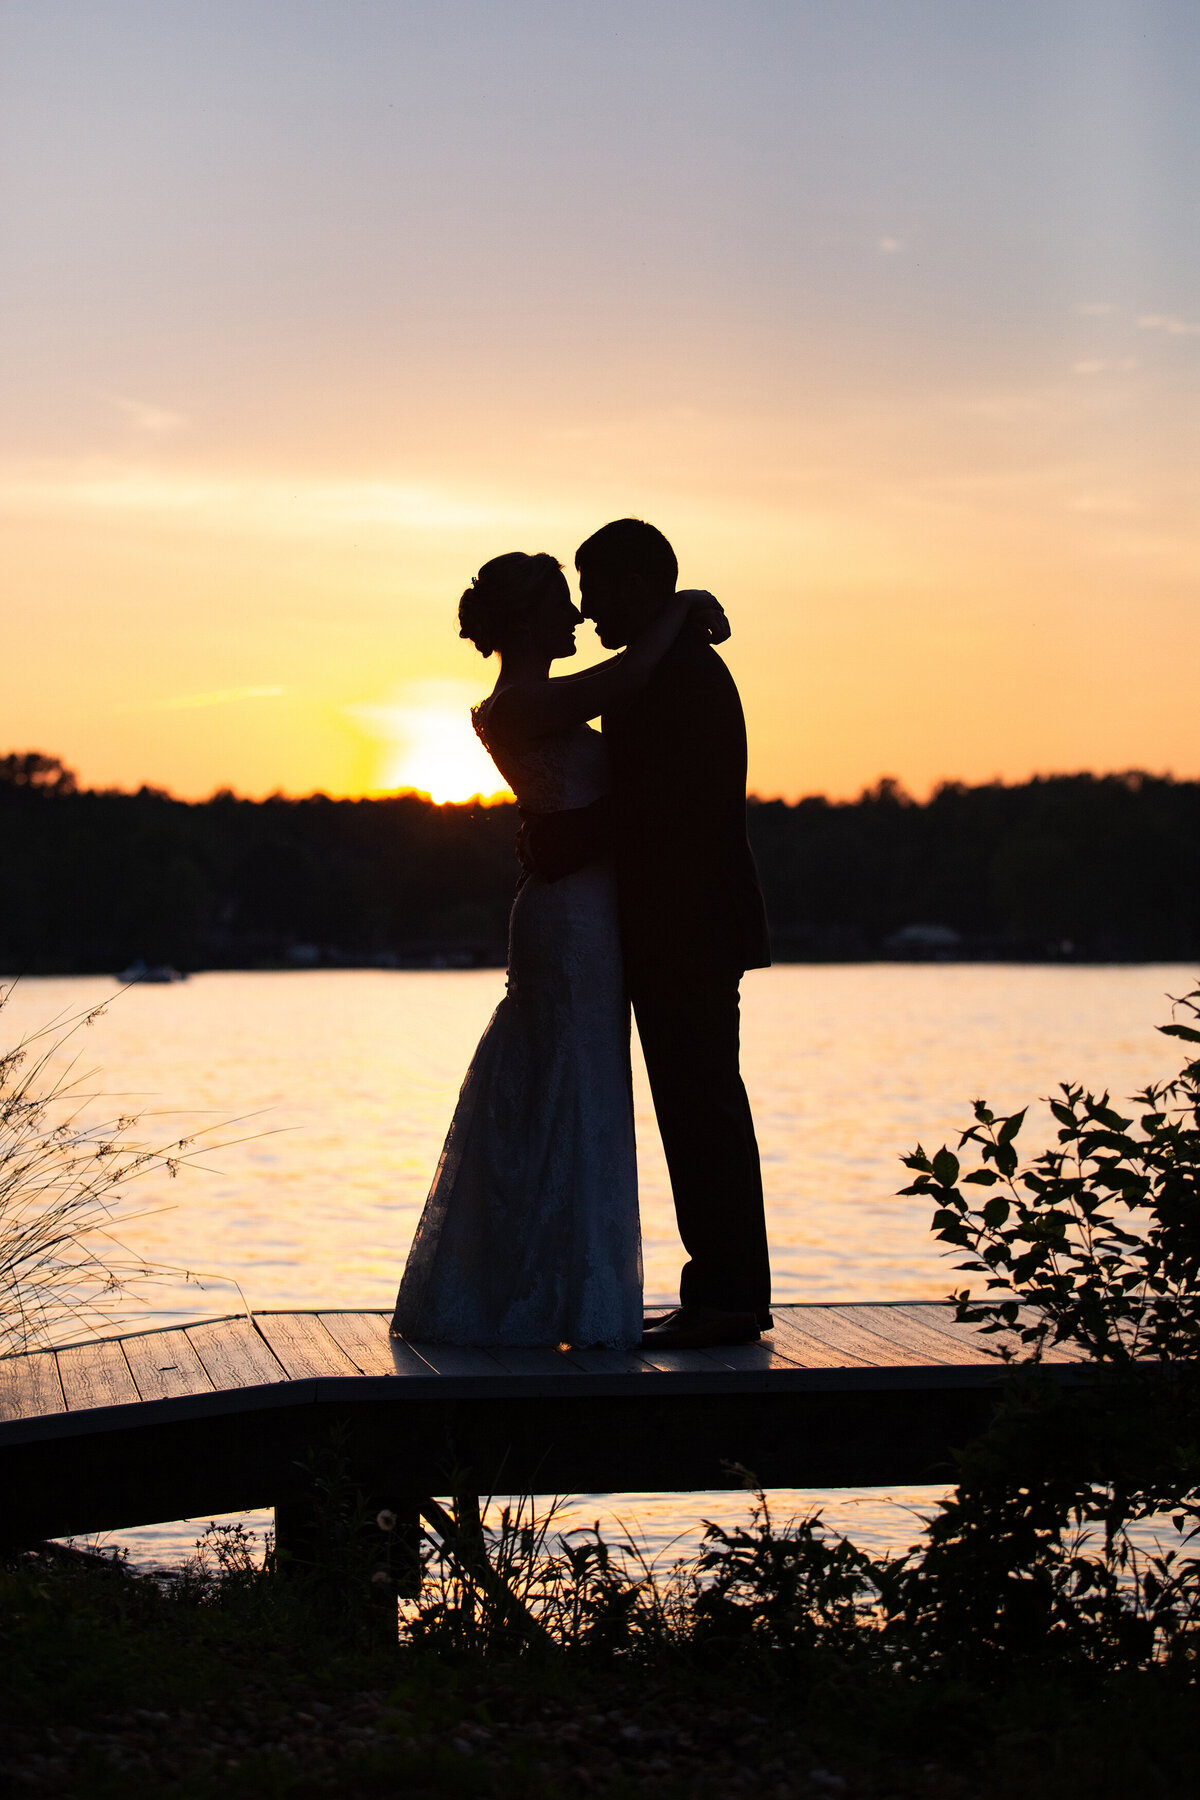 Sunset silhouette of the bride and groom at Lake Anna, Virginia